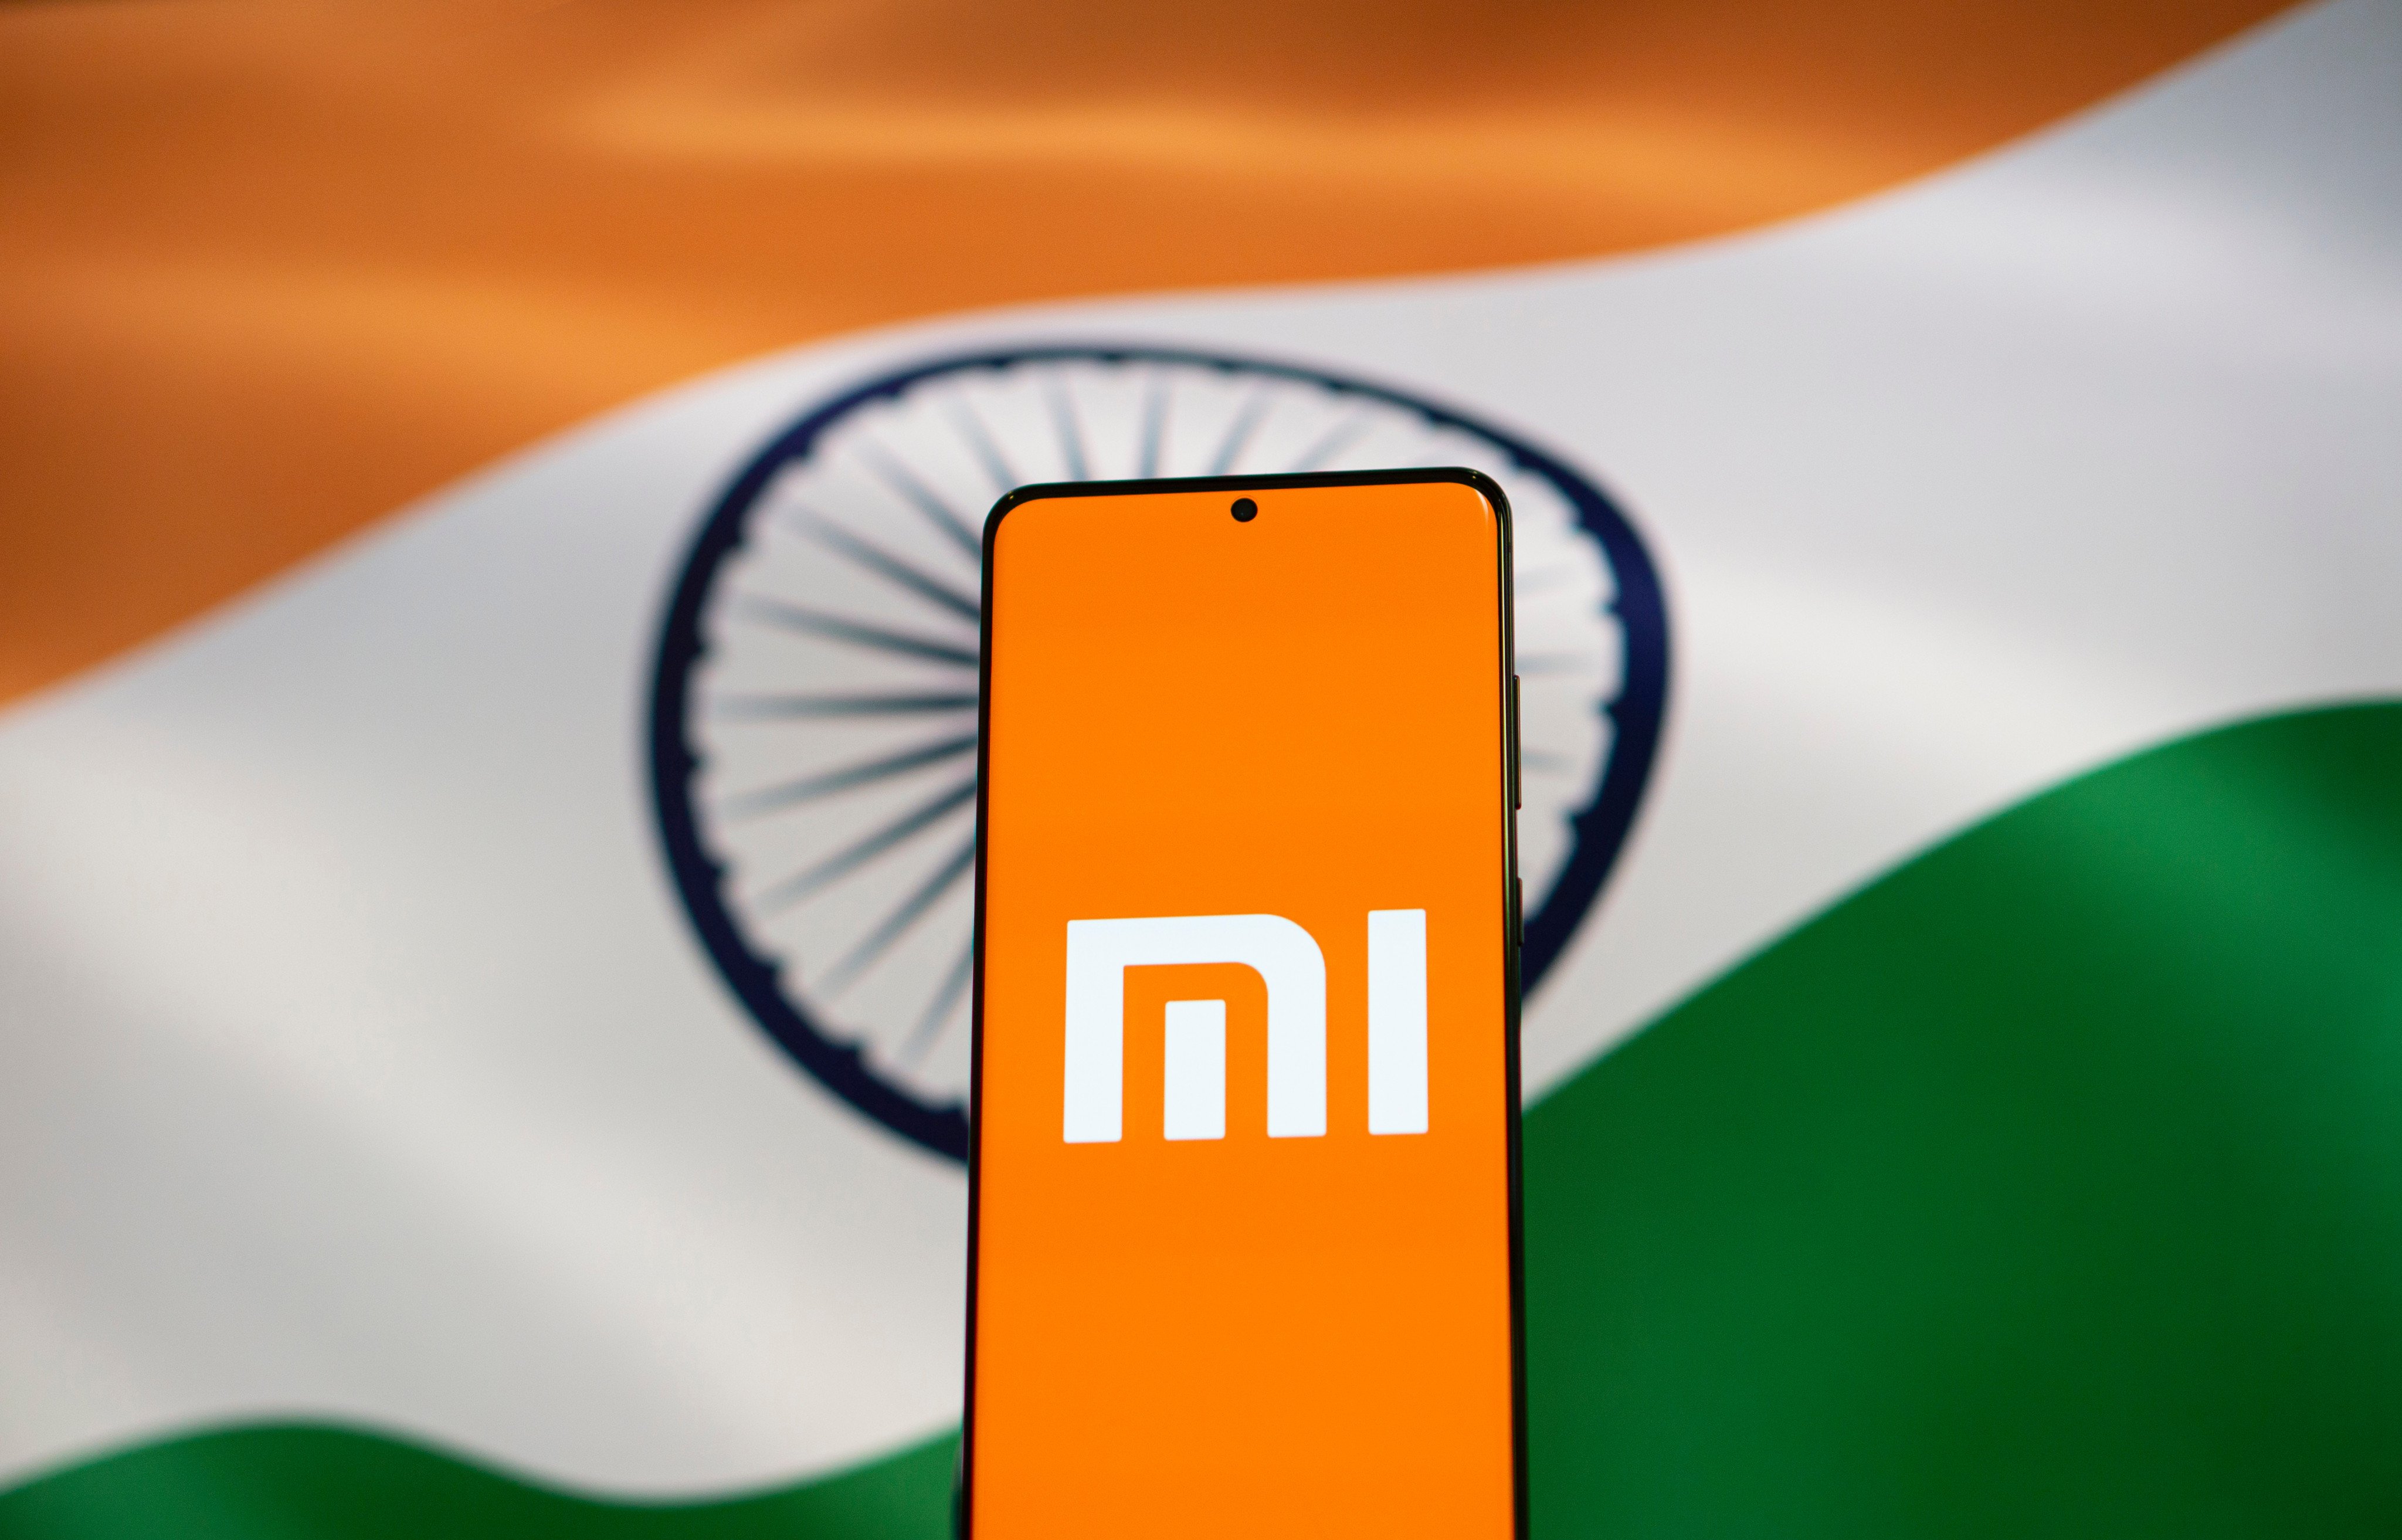 Xiaomi’s latest contract manufacturing partnership in India comes months after the company announced plans to expand its network of bricks-and-mortar stores across the country. Photo: Shutterstock 